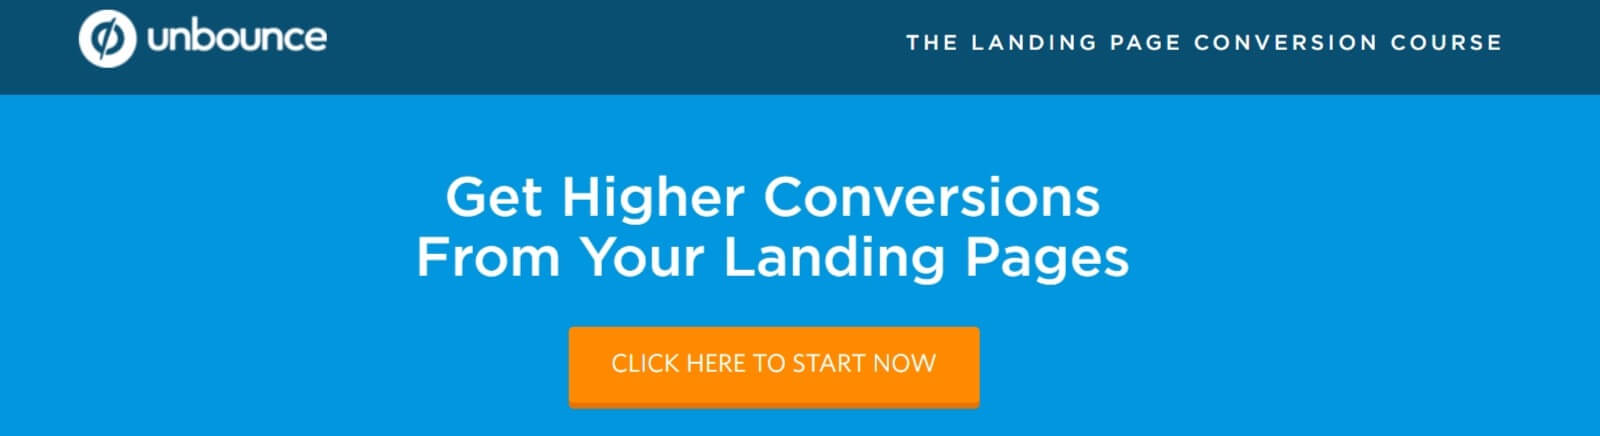 The Unbounce landing page